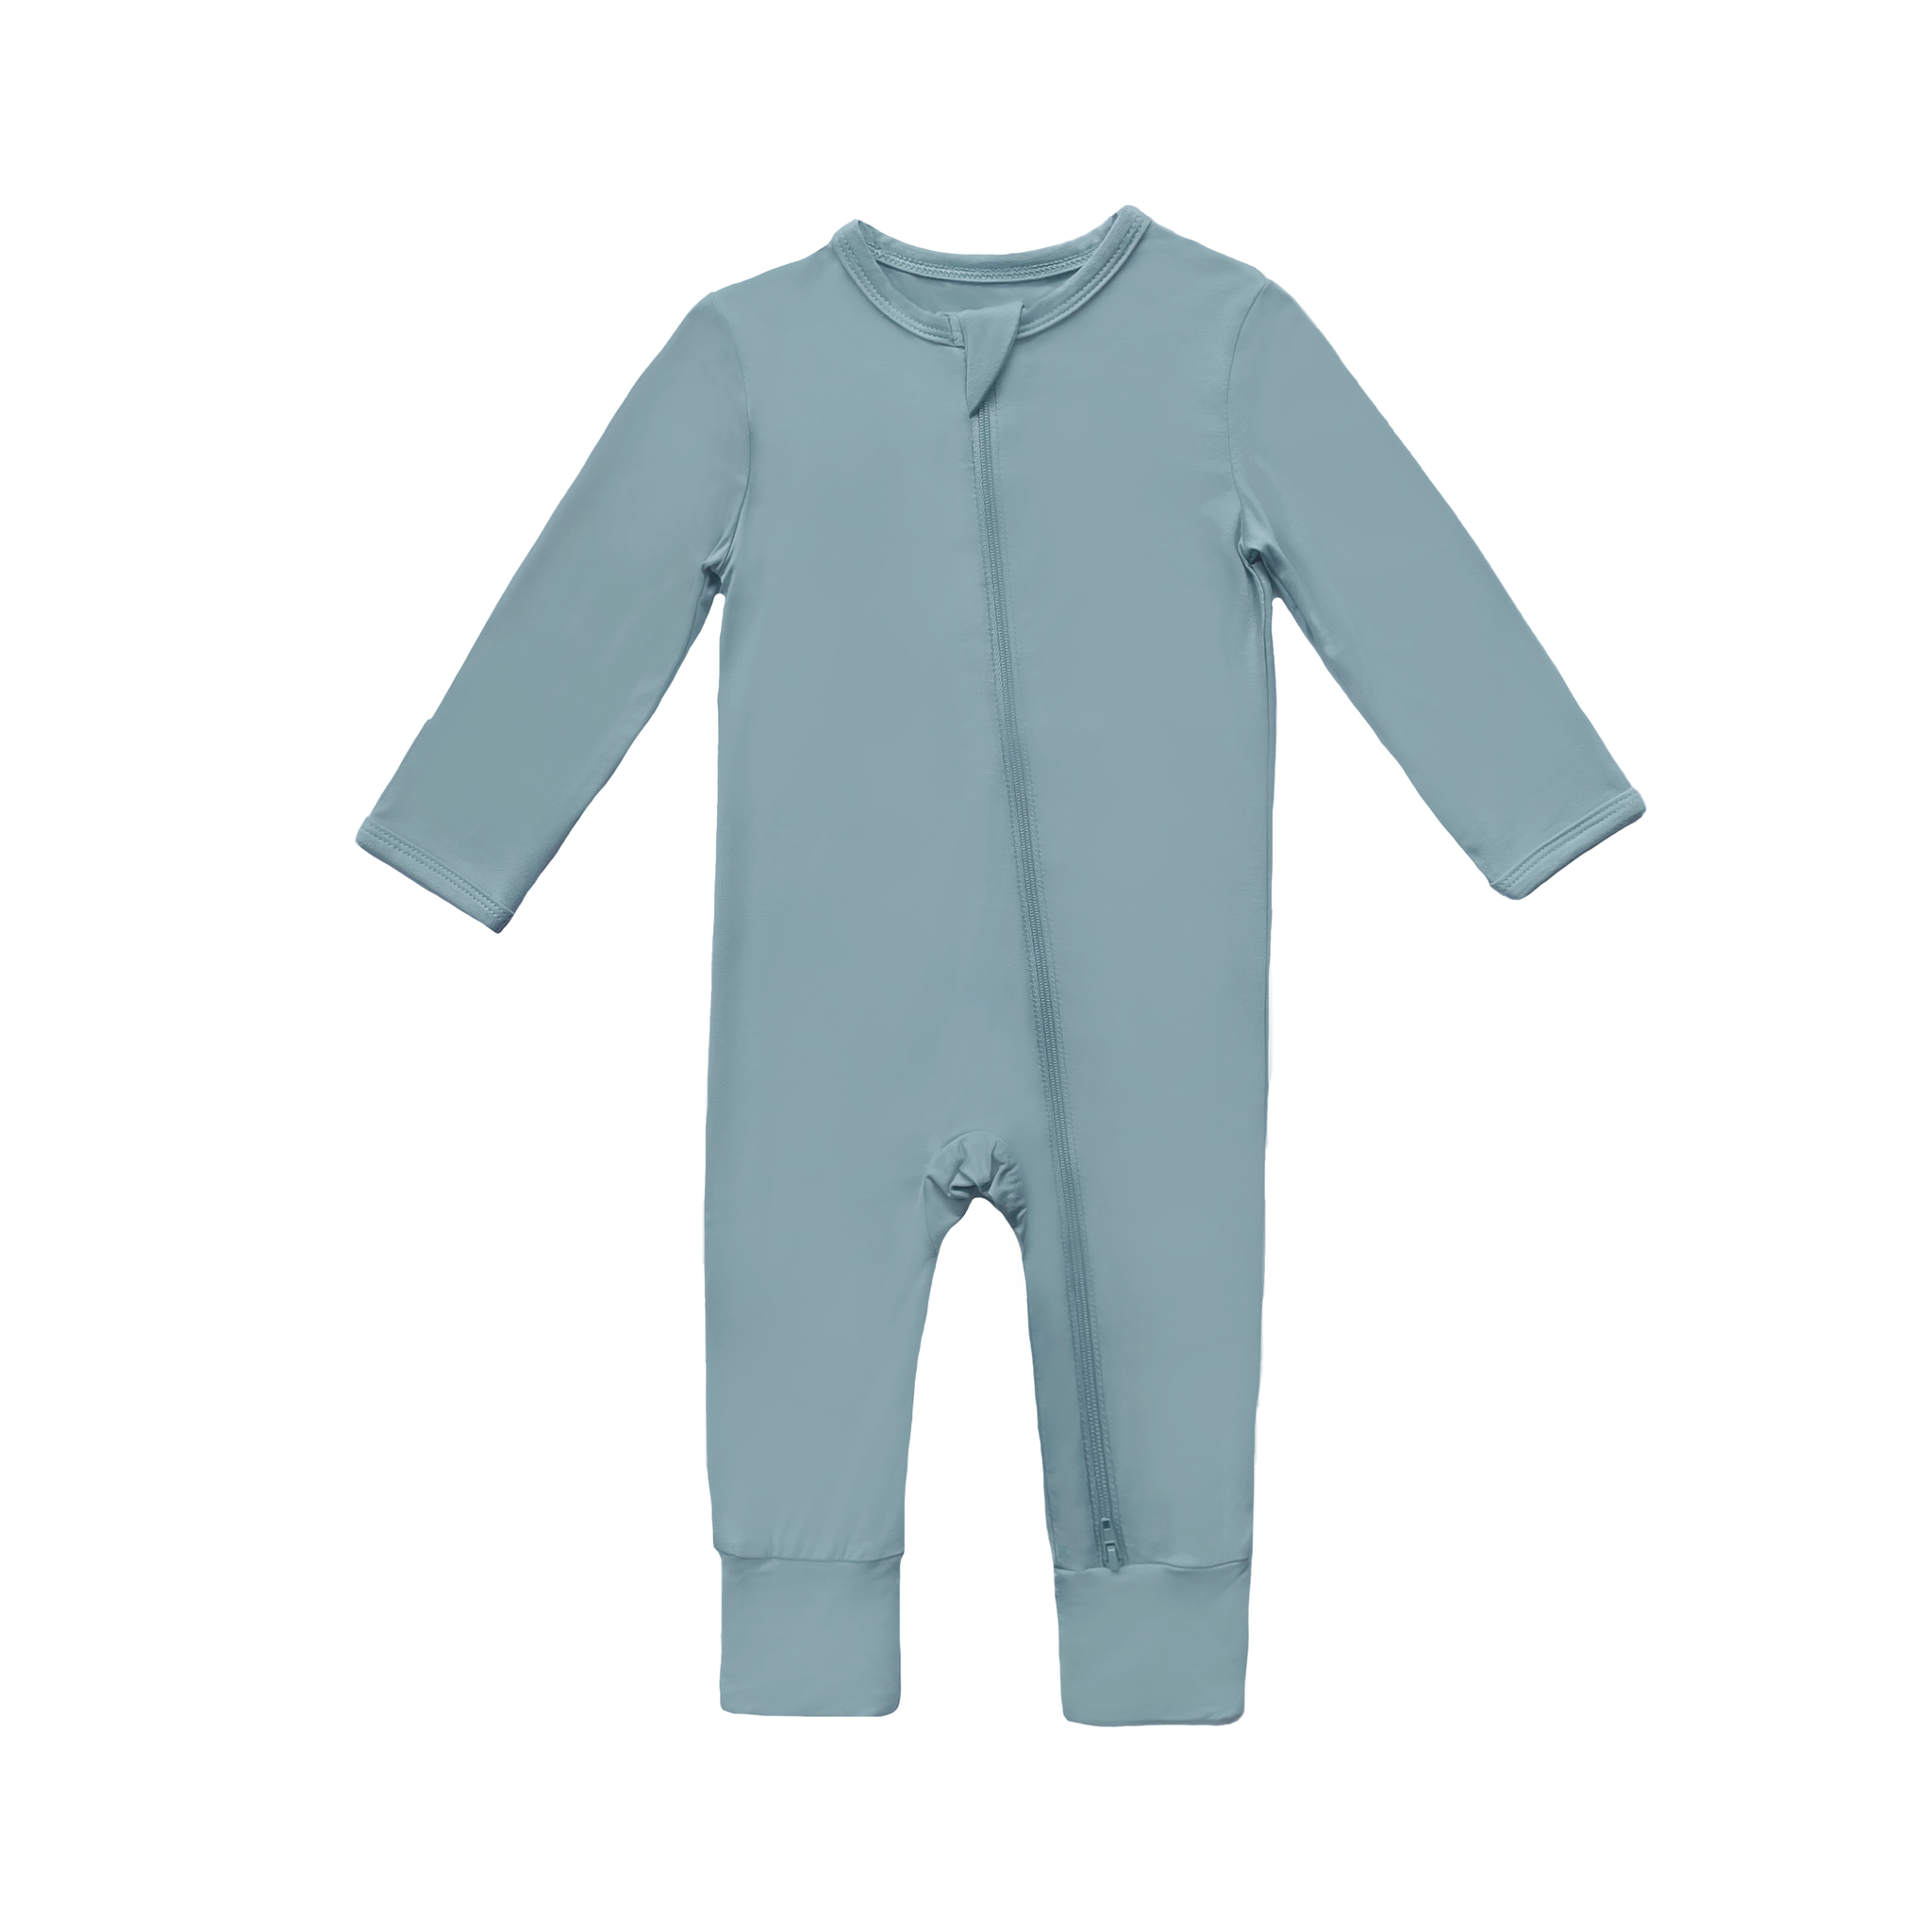 These Tiny Things Zip Sleepsuit